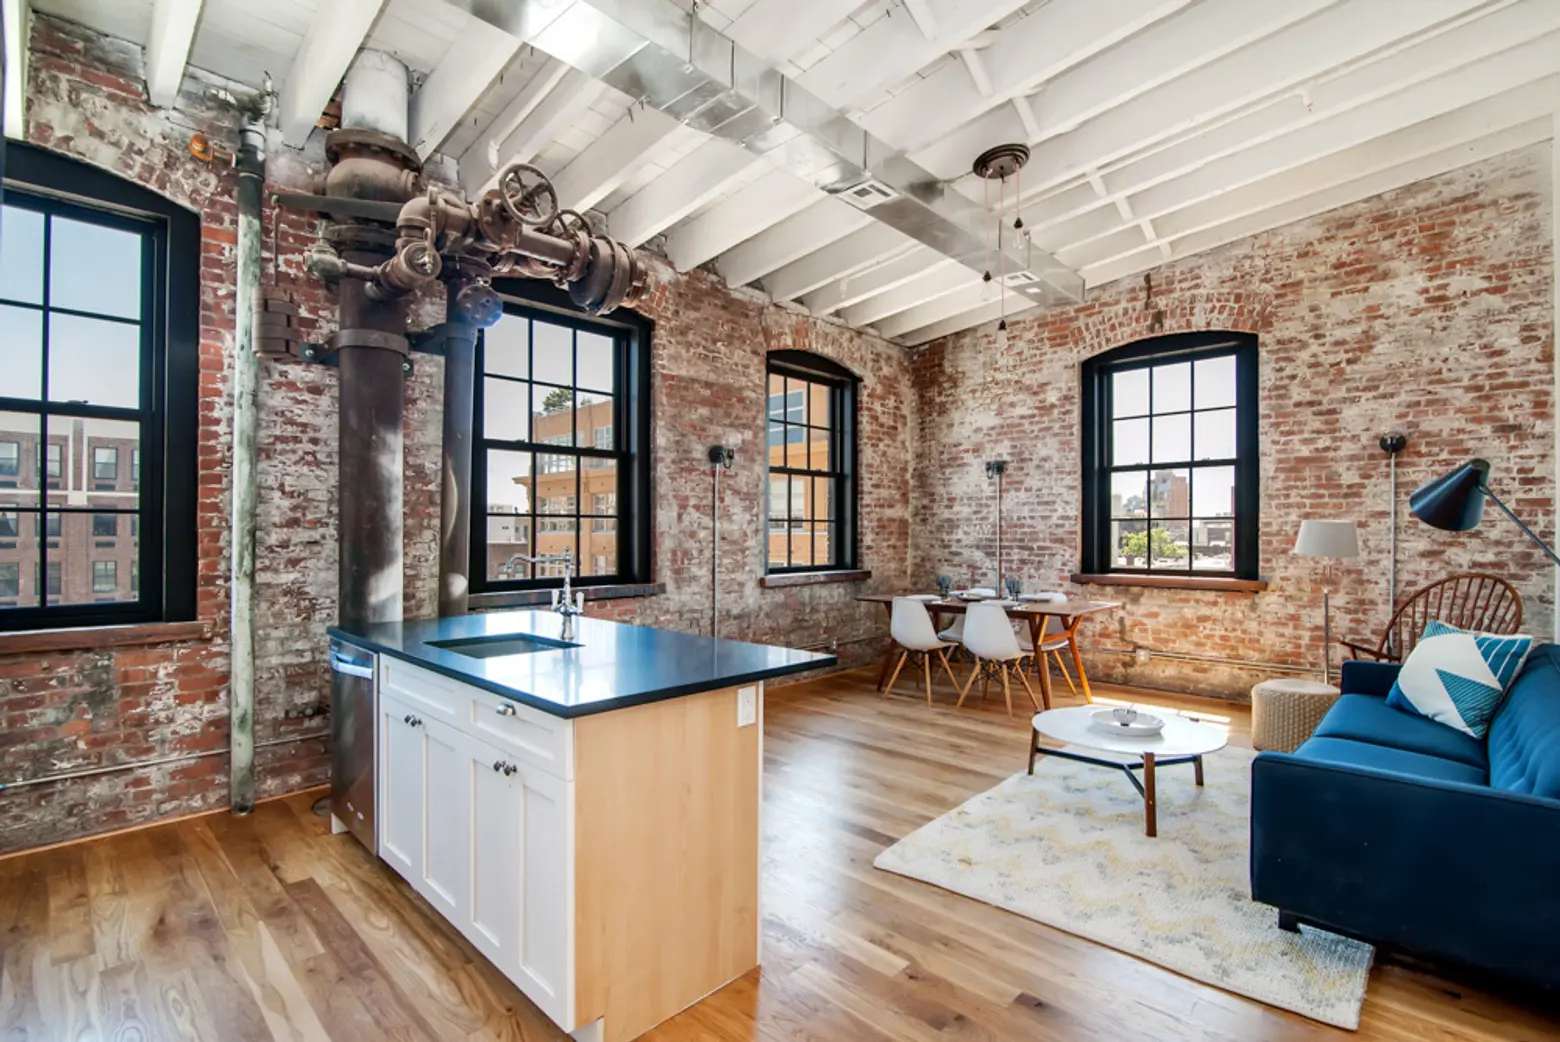 Williamsburg’s New Soda Factory Lofts Bottle Industrial Architecture but Add Modern Style